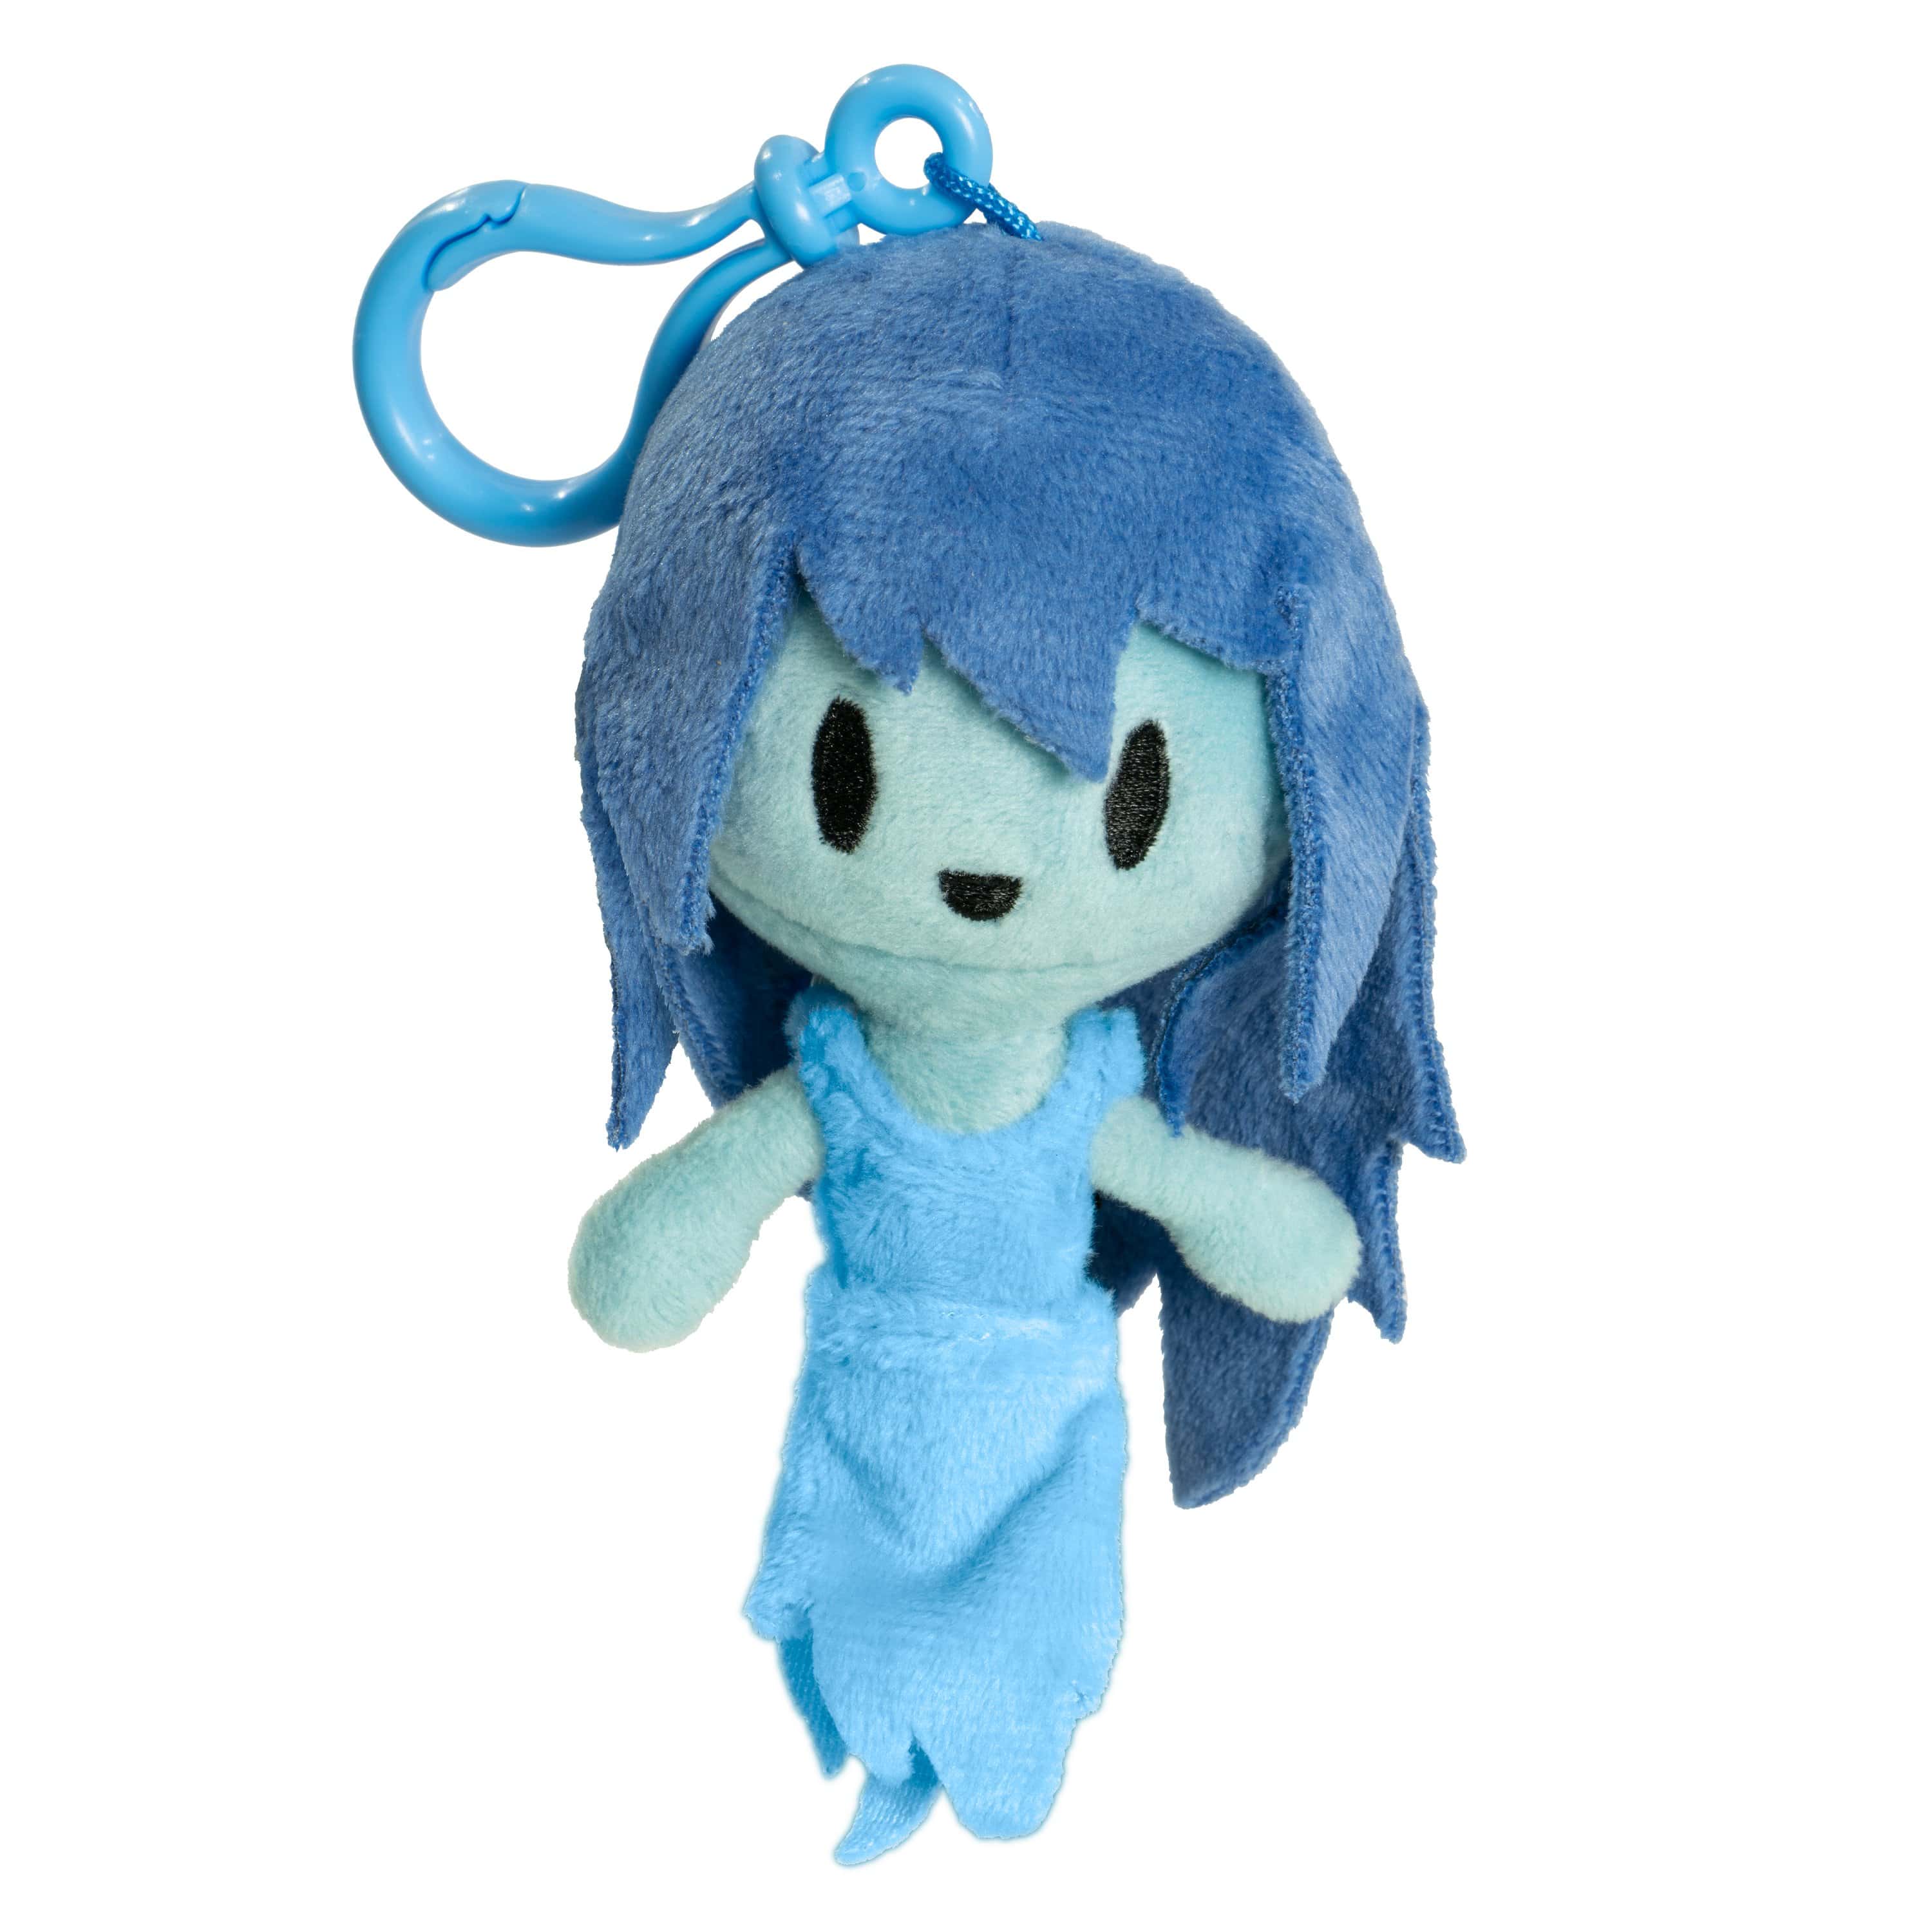 Spooky's Jumpscare Mansion - 5" Spooky Stuffed Hanger Plush Toy Front View